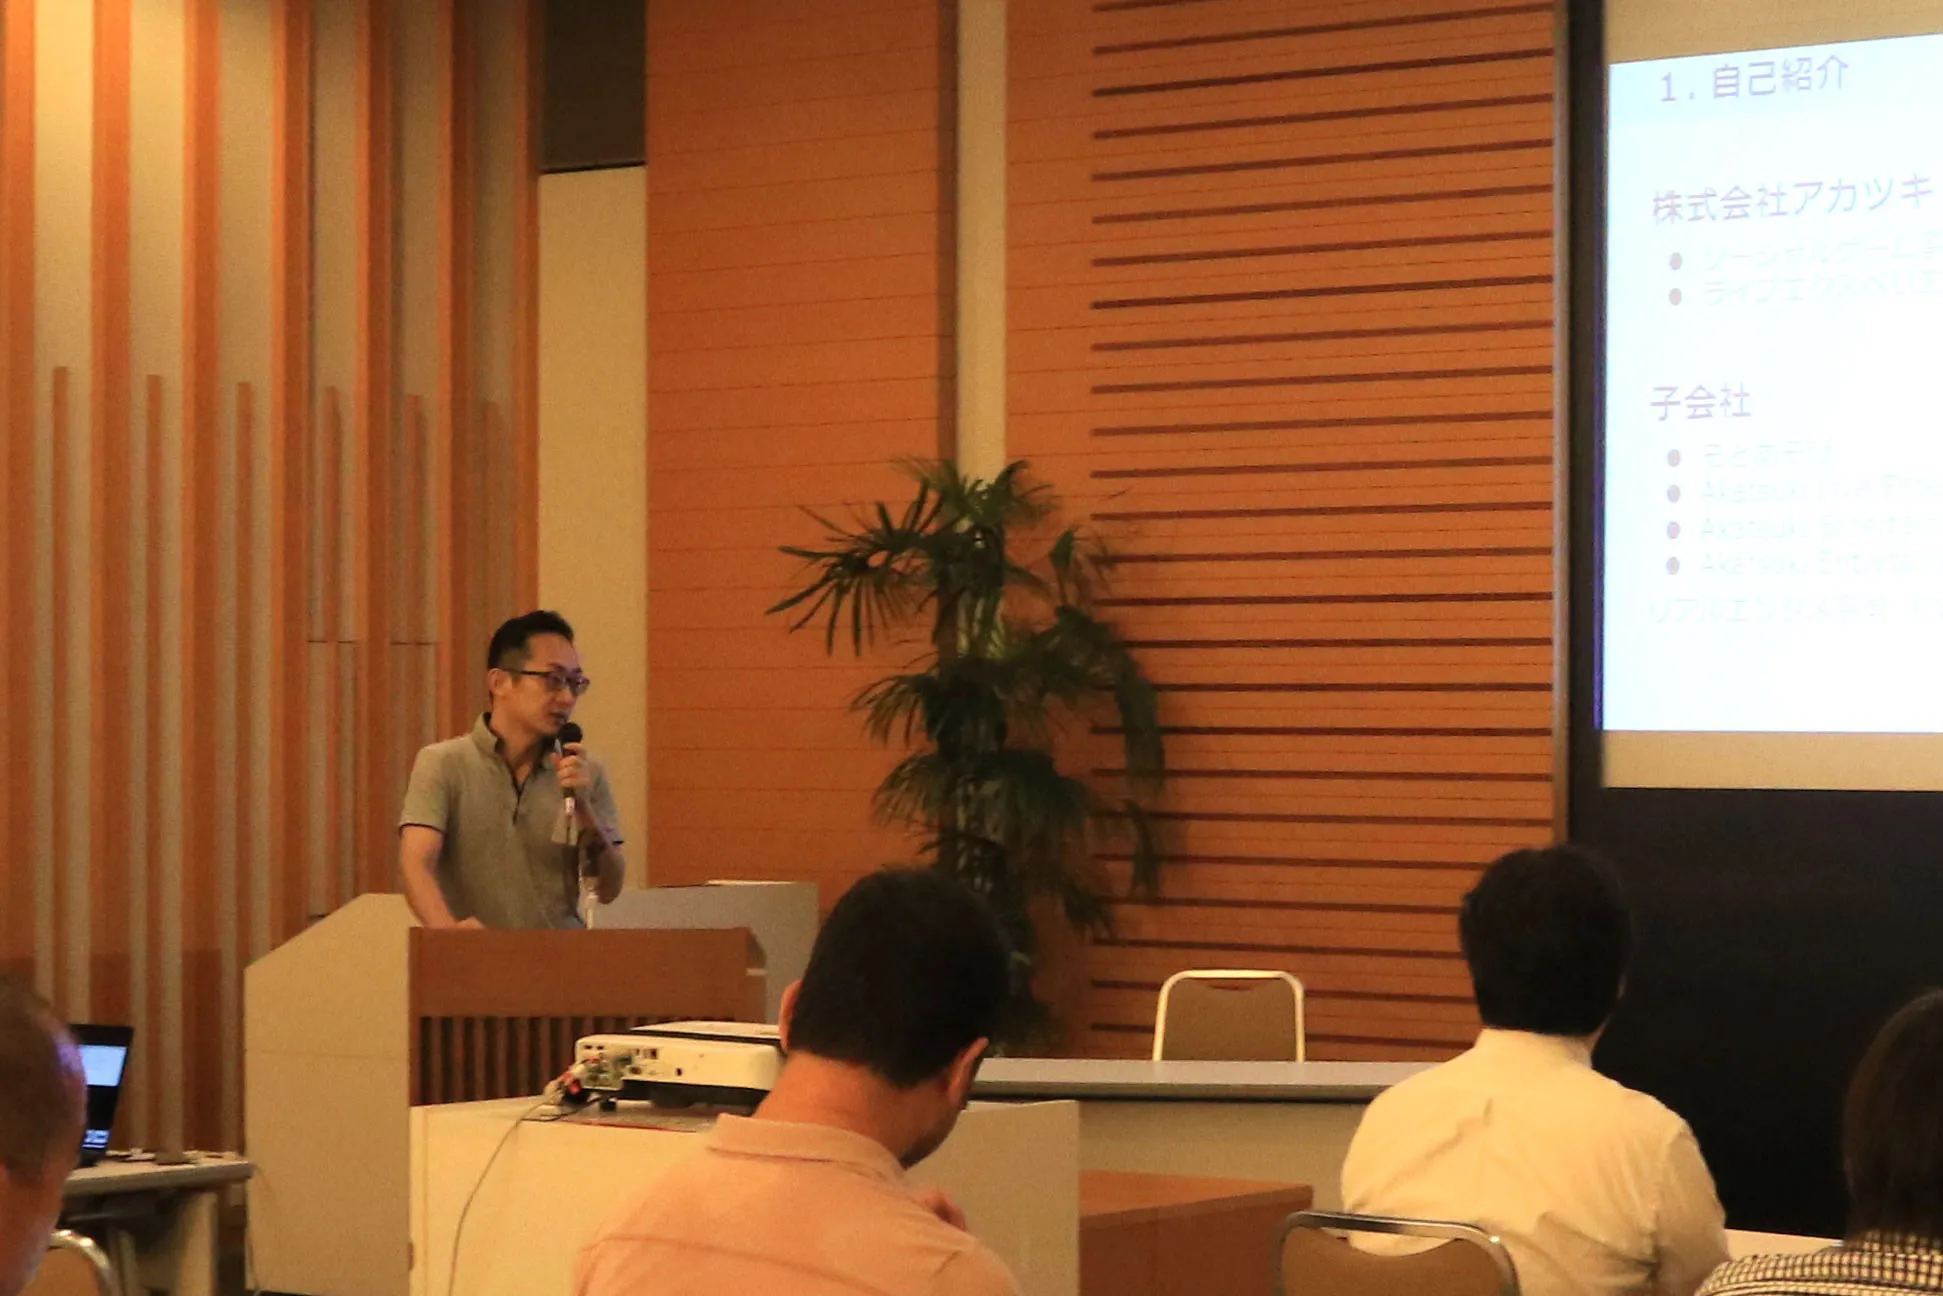 OneLogin UserGroup Meeting 公演中の様子